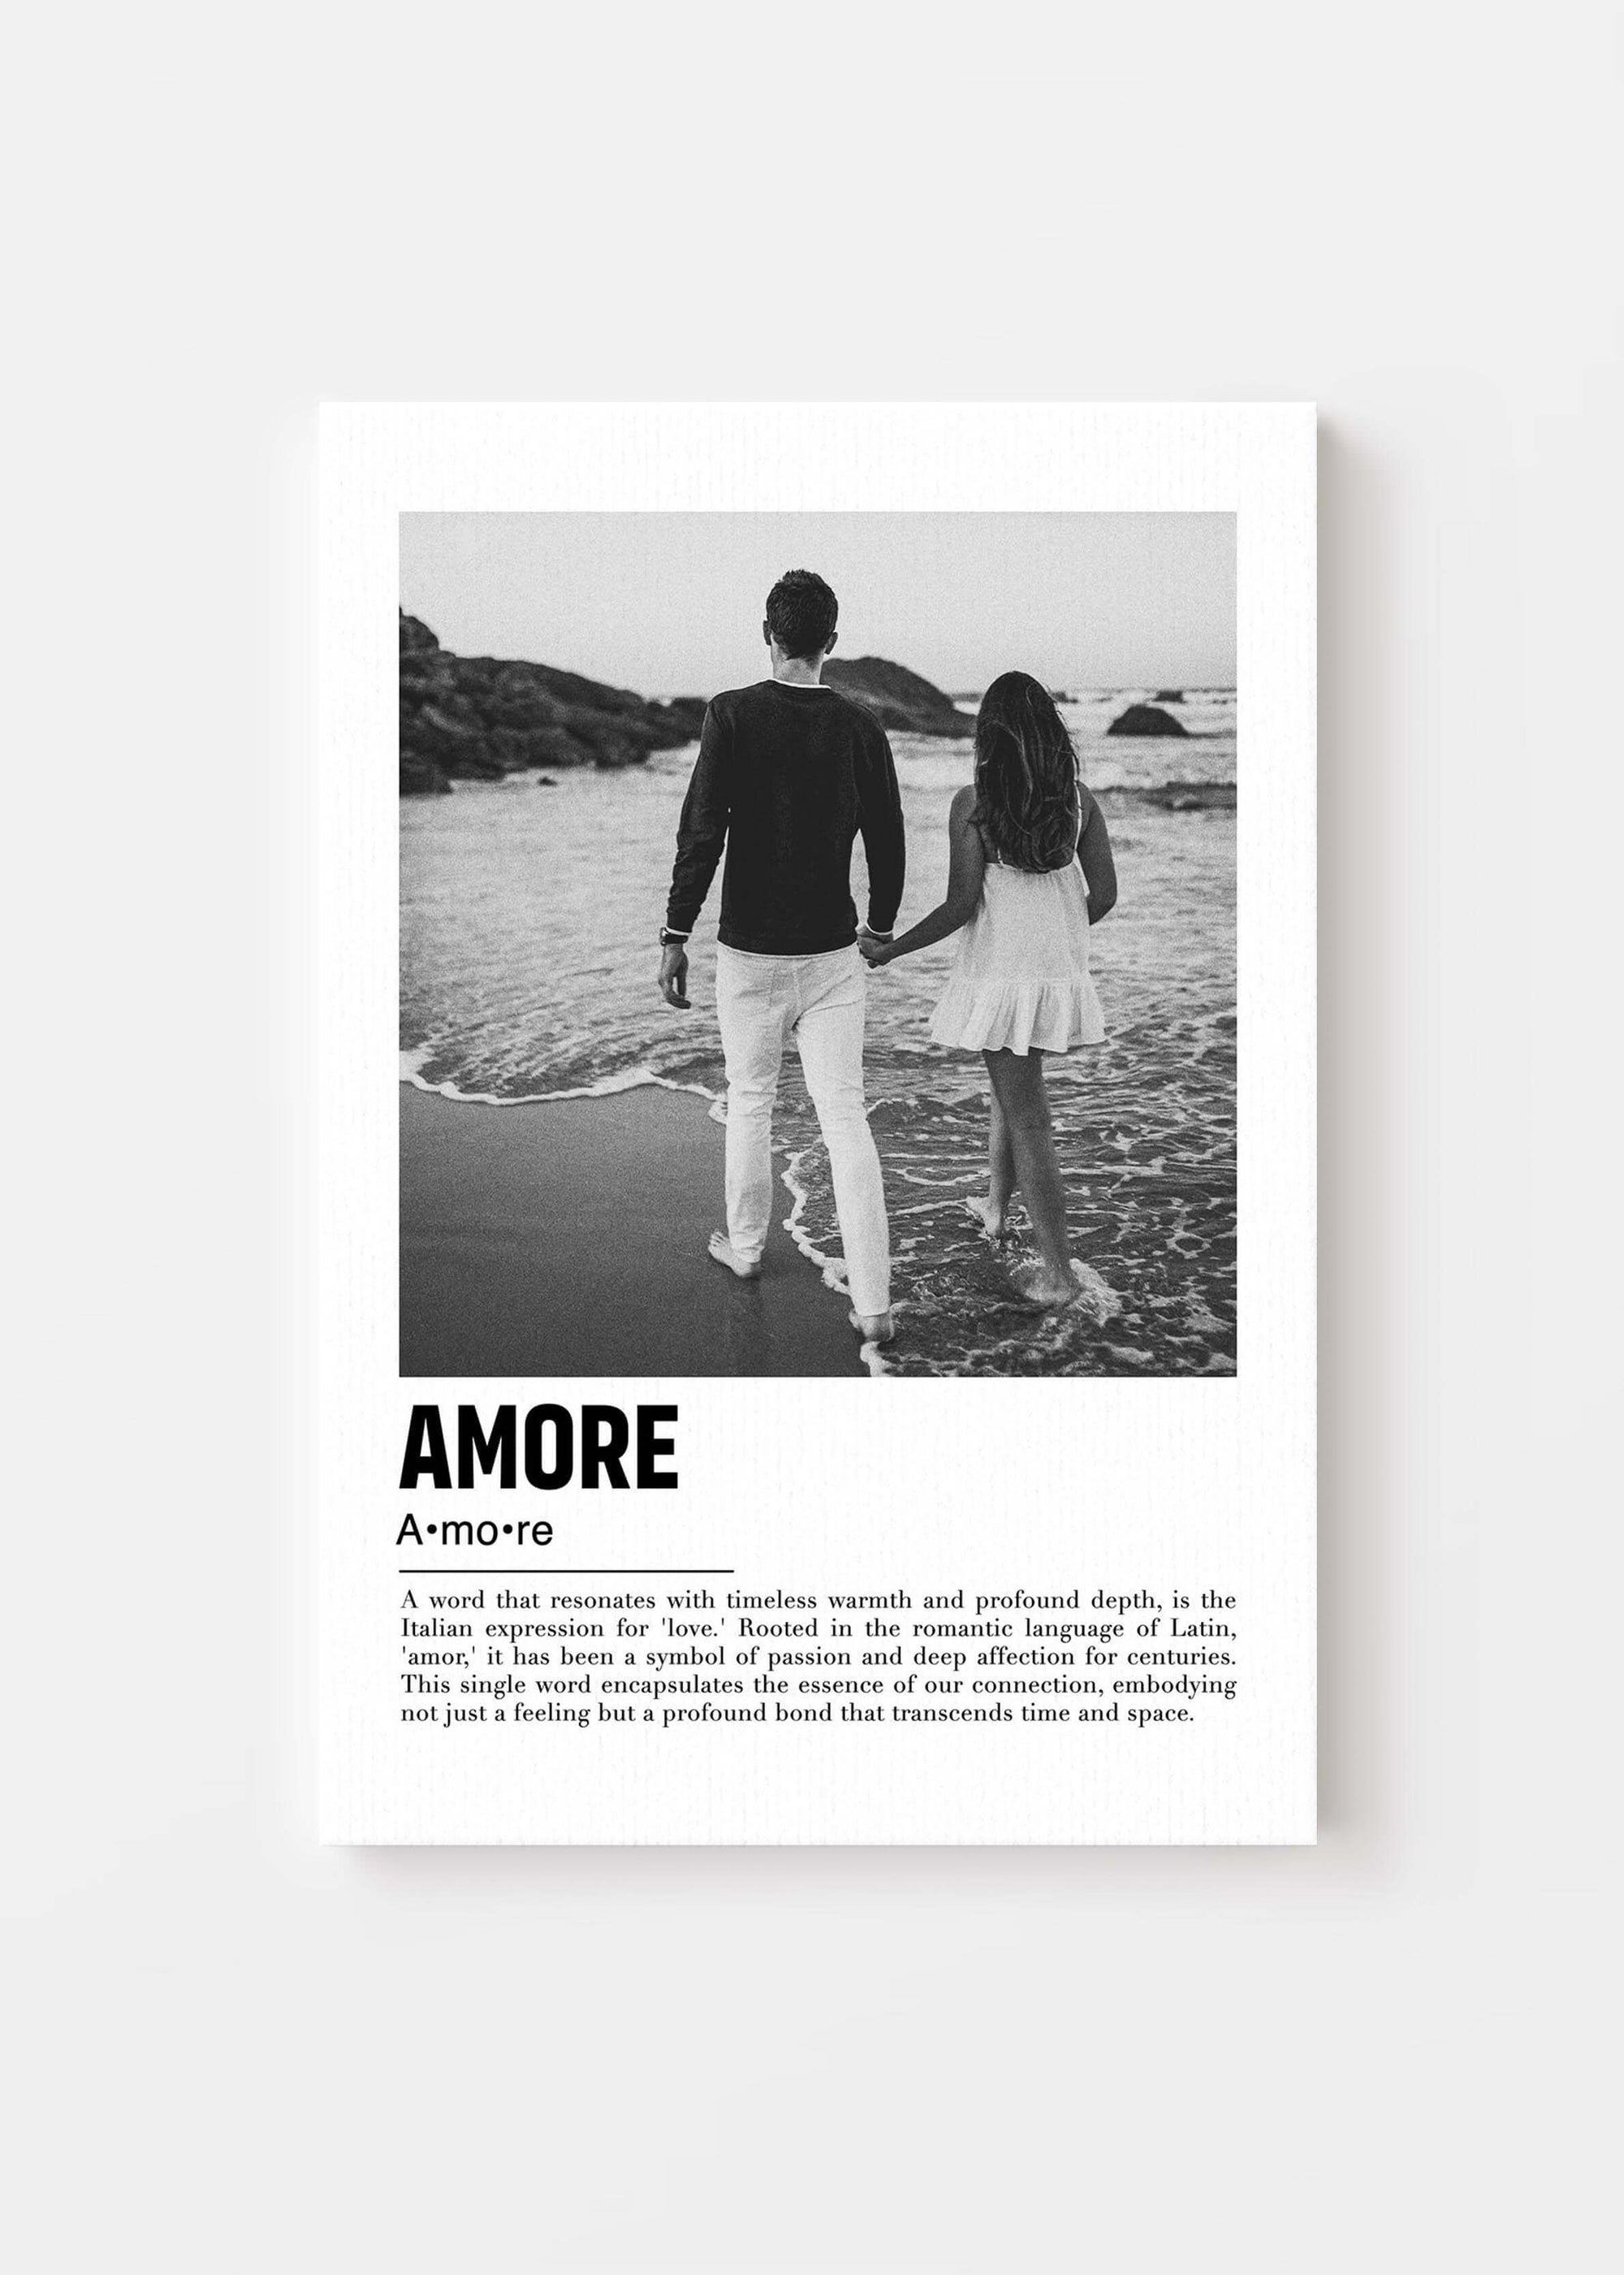 Anniversary gift of a personalized photo of a couple walking on a beach in black and white with a custom message on canvas on a white background.